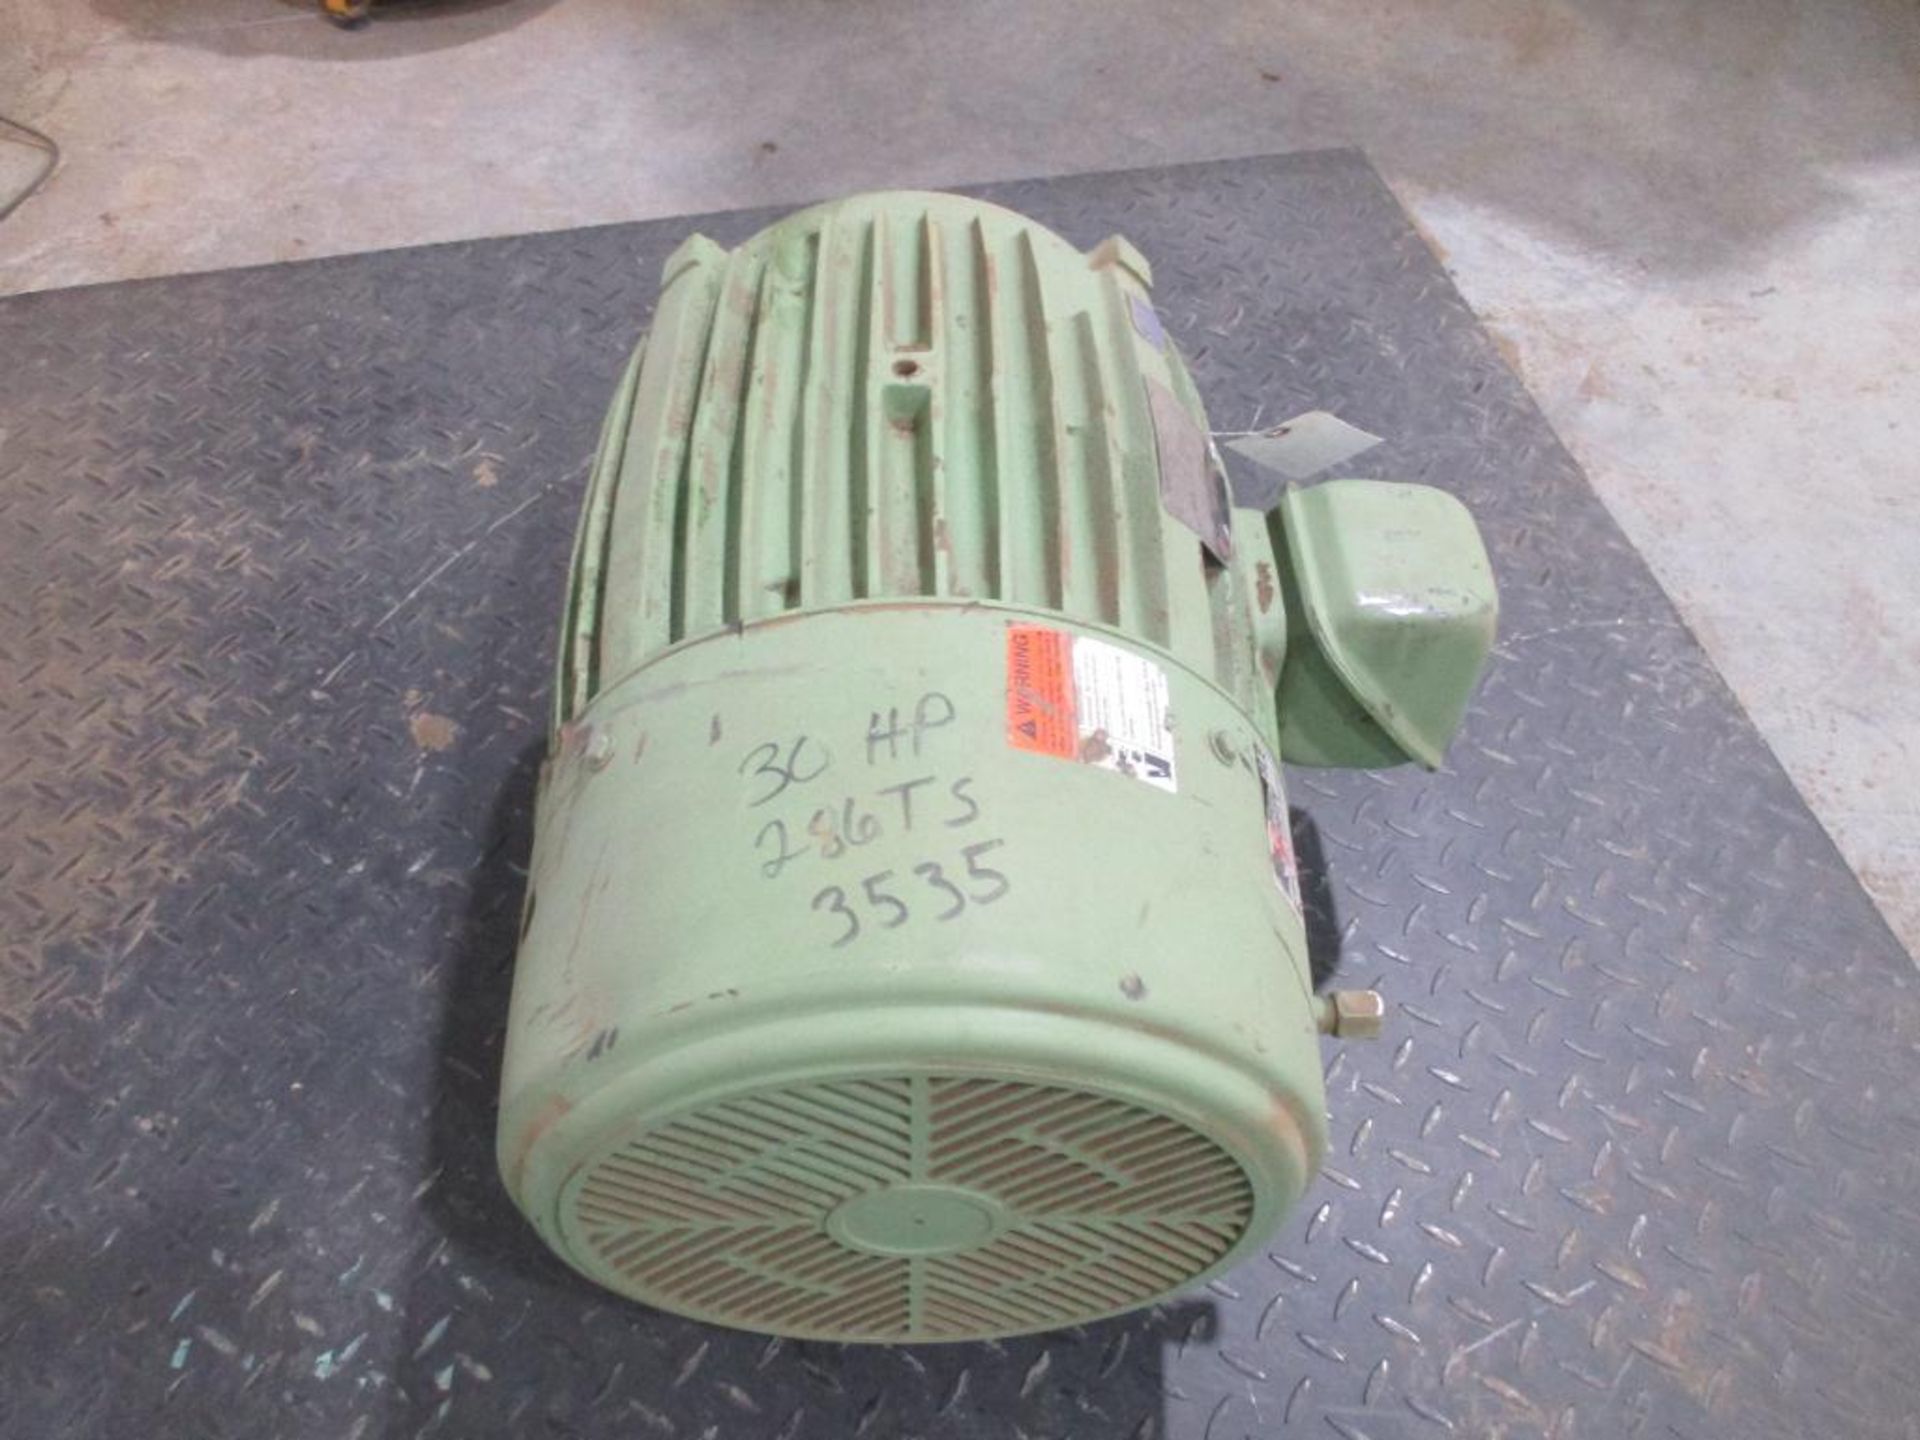 US MOTORS 3 PHASE 30HP 3535RPM 286TS FRAME A/C MOTOR P/N 5412-50-XDBX117303R, 341# lbs (There will b - Image 4 of 5